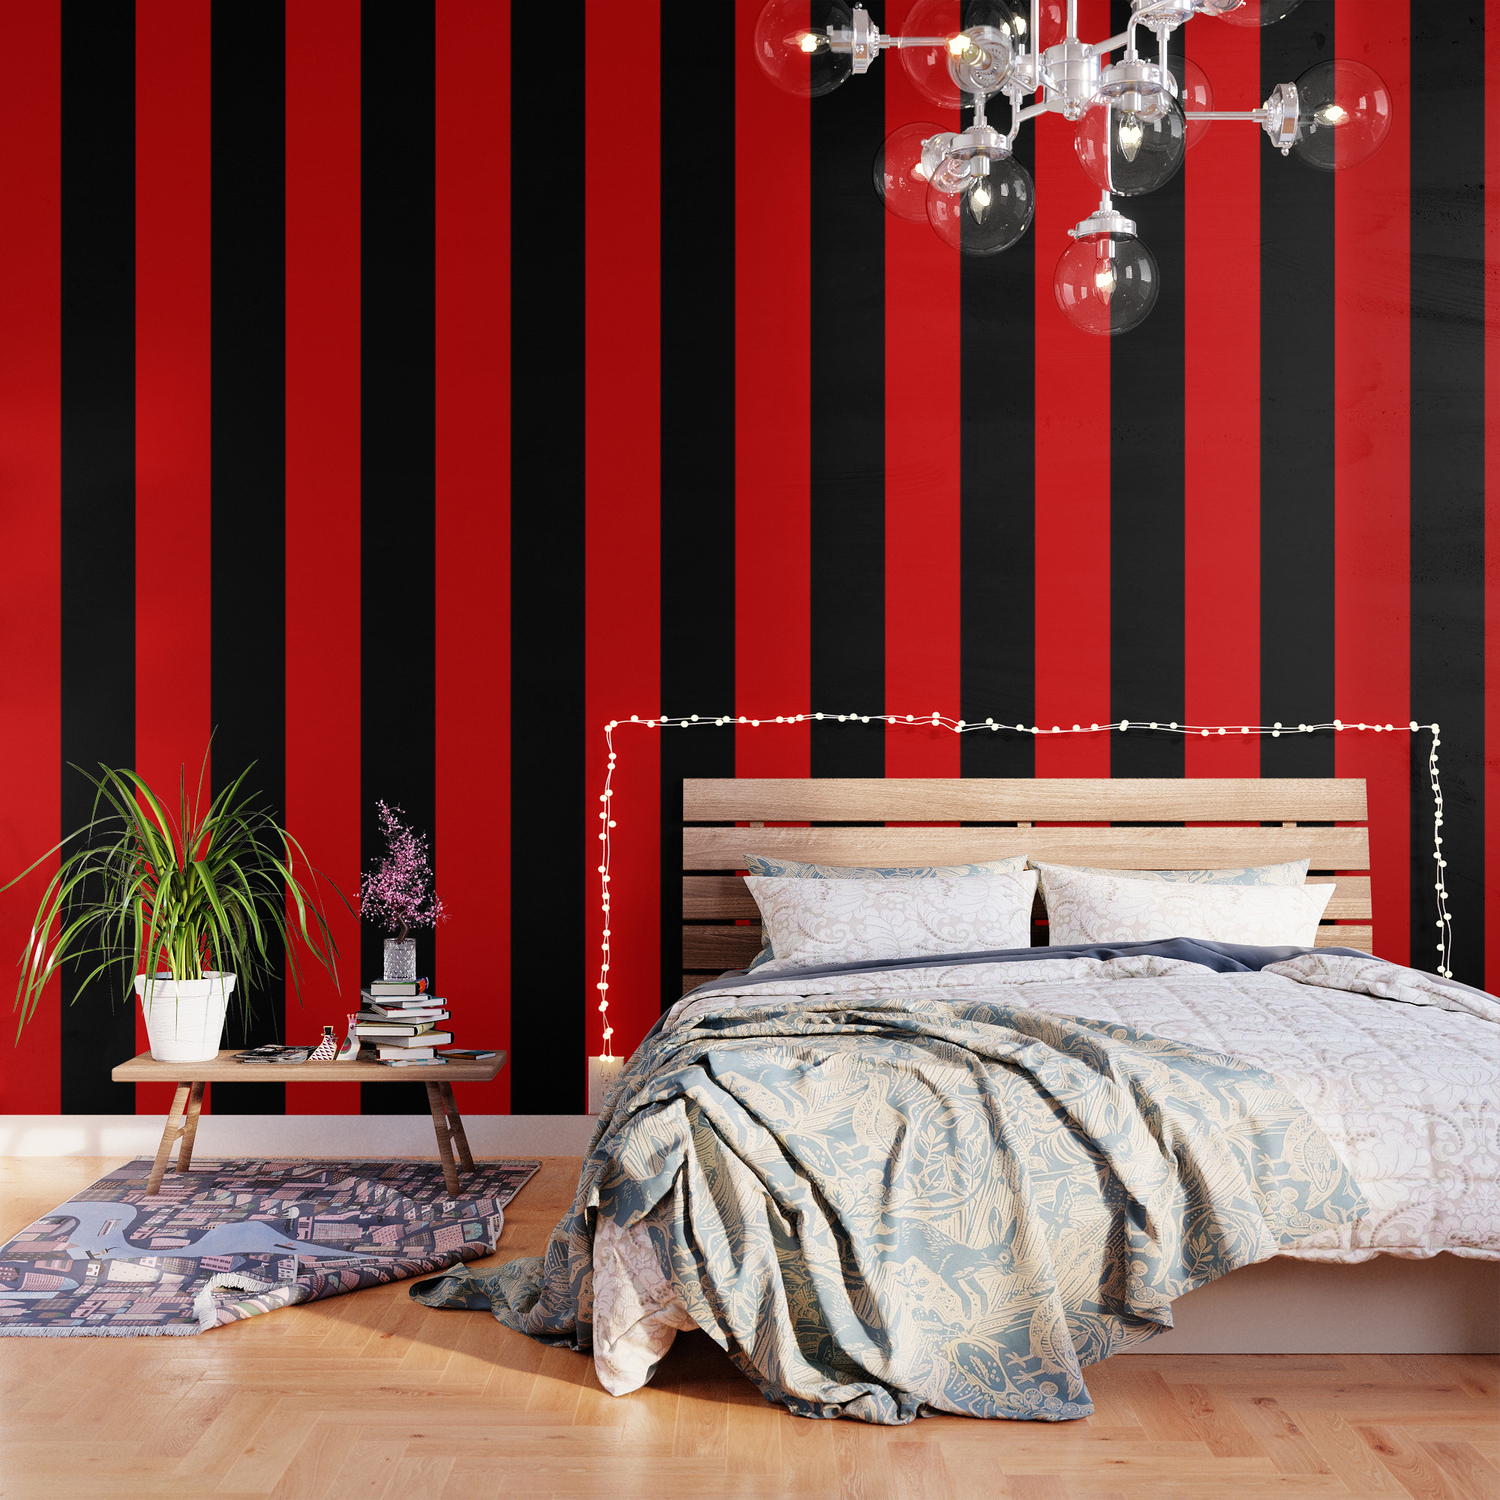 Psychedelic black and red stripes VII. Wallpaper by RM - Blanik. | Society6